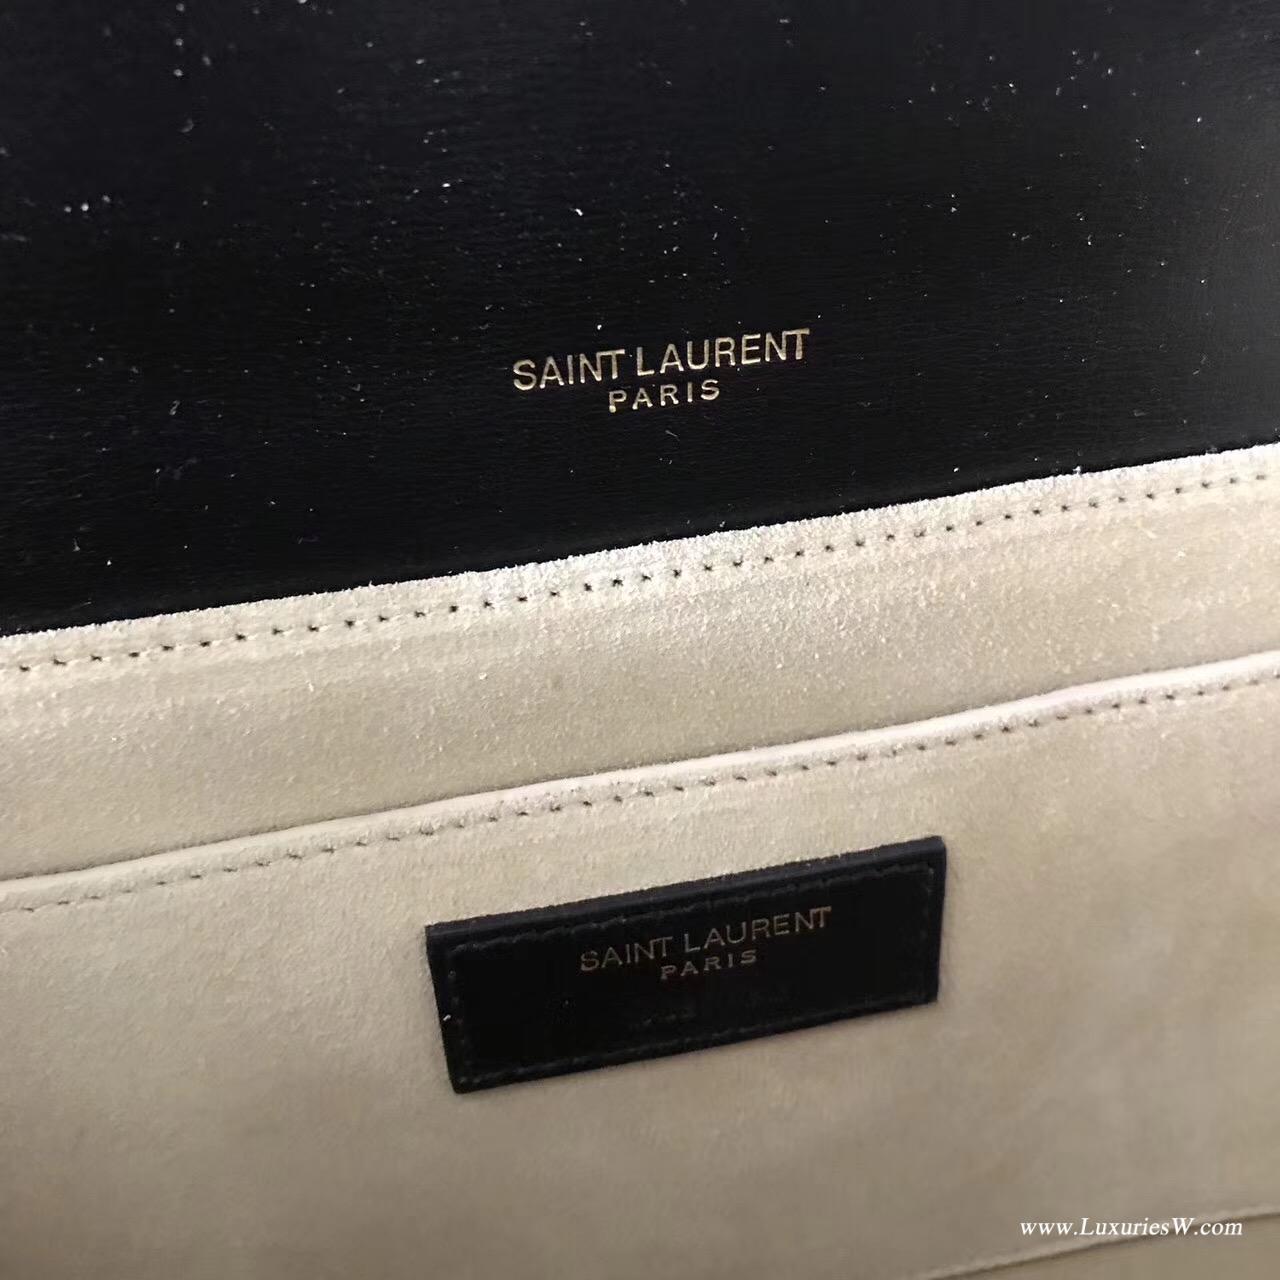 YSL Medium BELLECHASSE SAINT LAURENT bag in black leather and taupe suede